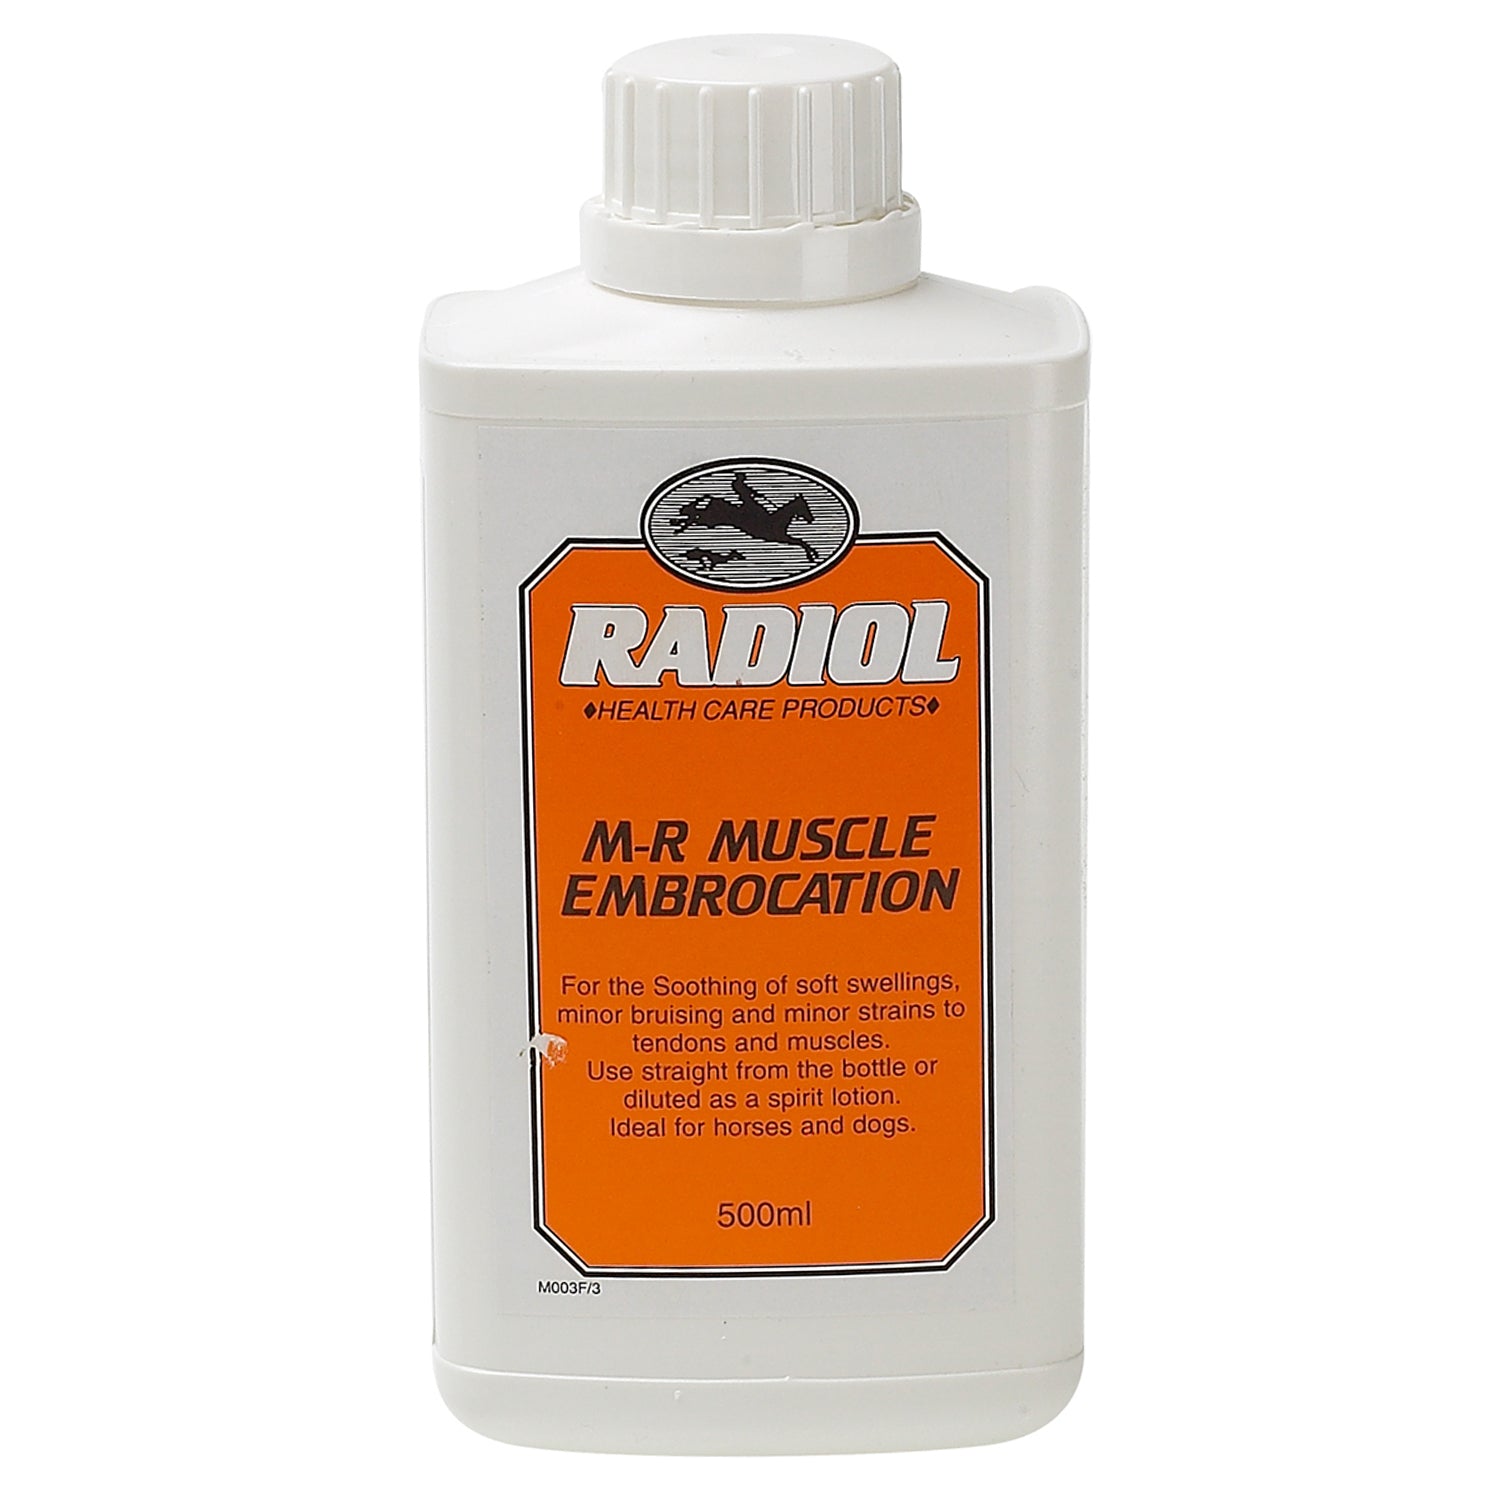 Radiol M-R Muscle Embrocation